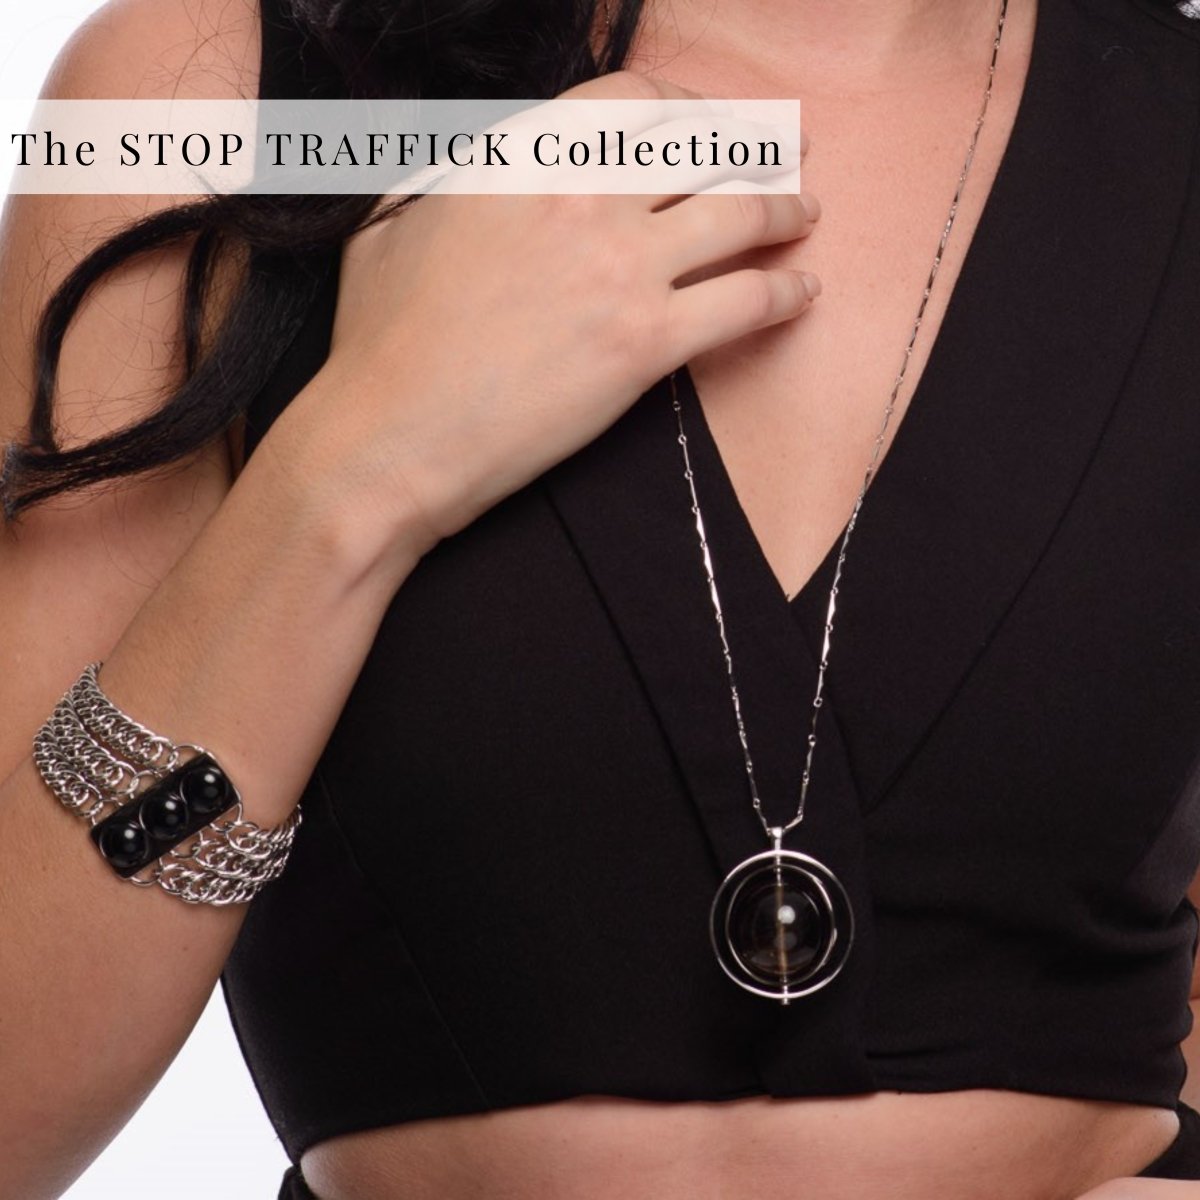 The STOP TRAFFICK Collection | C.J.ROCKER